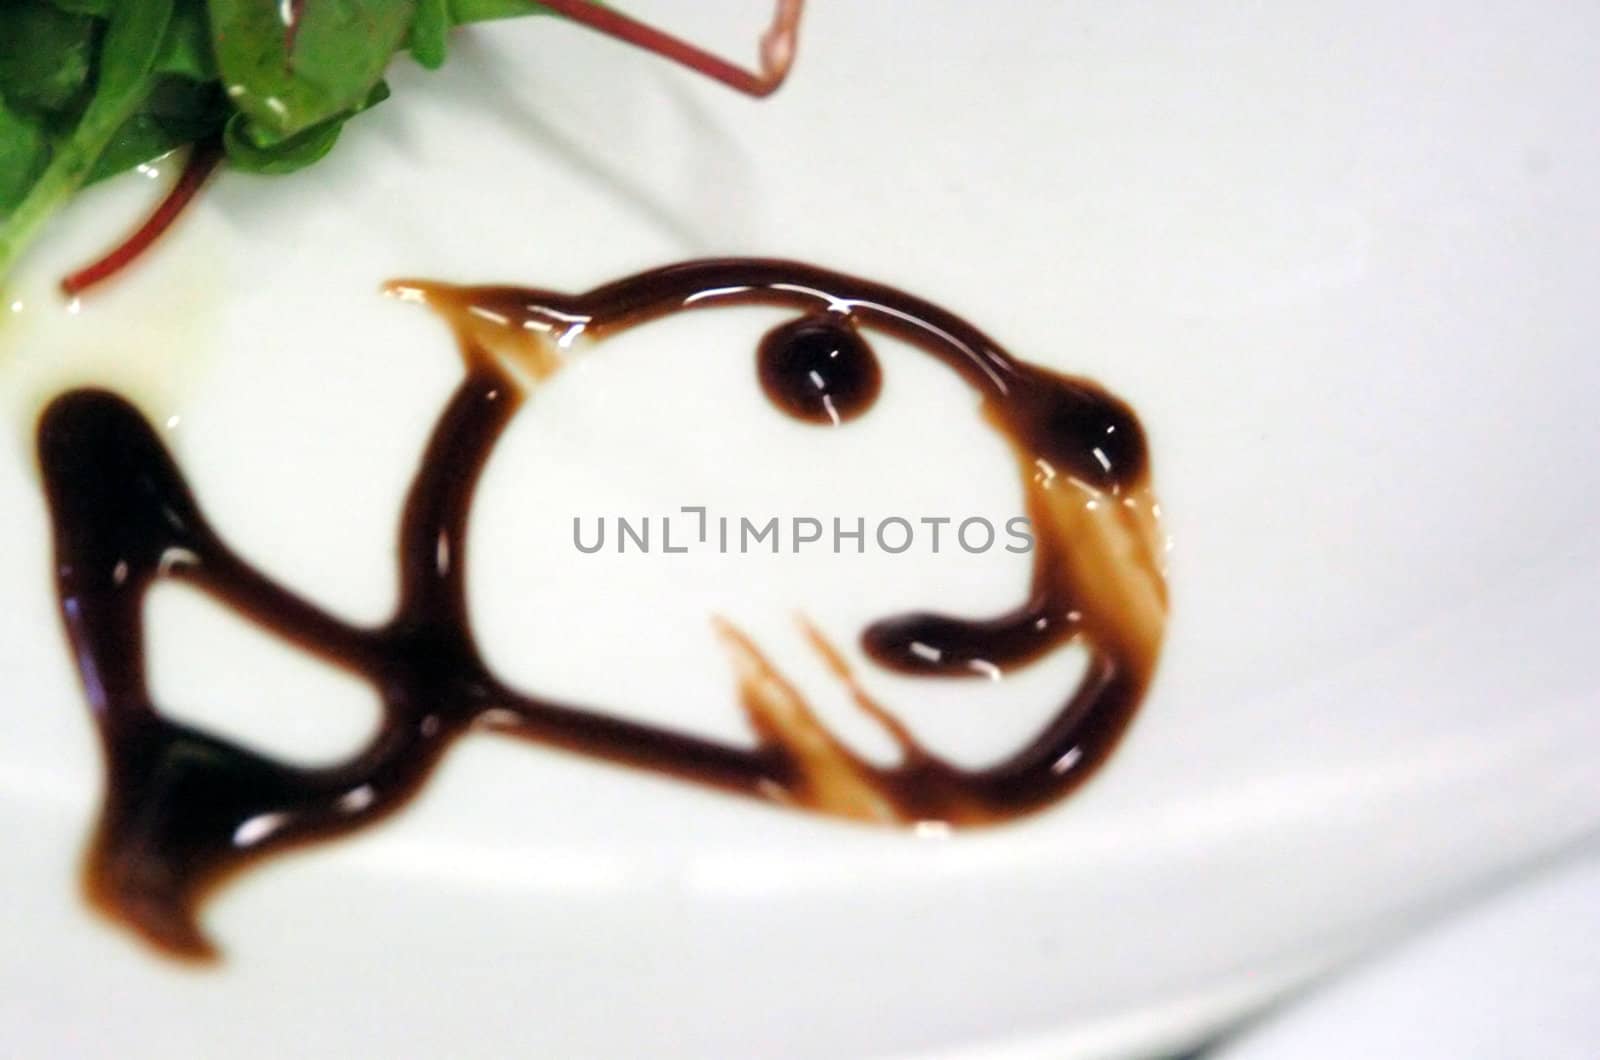 balsamico vinagre decoration in fish form on a white plate with green salad leaves